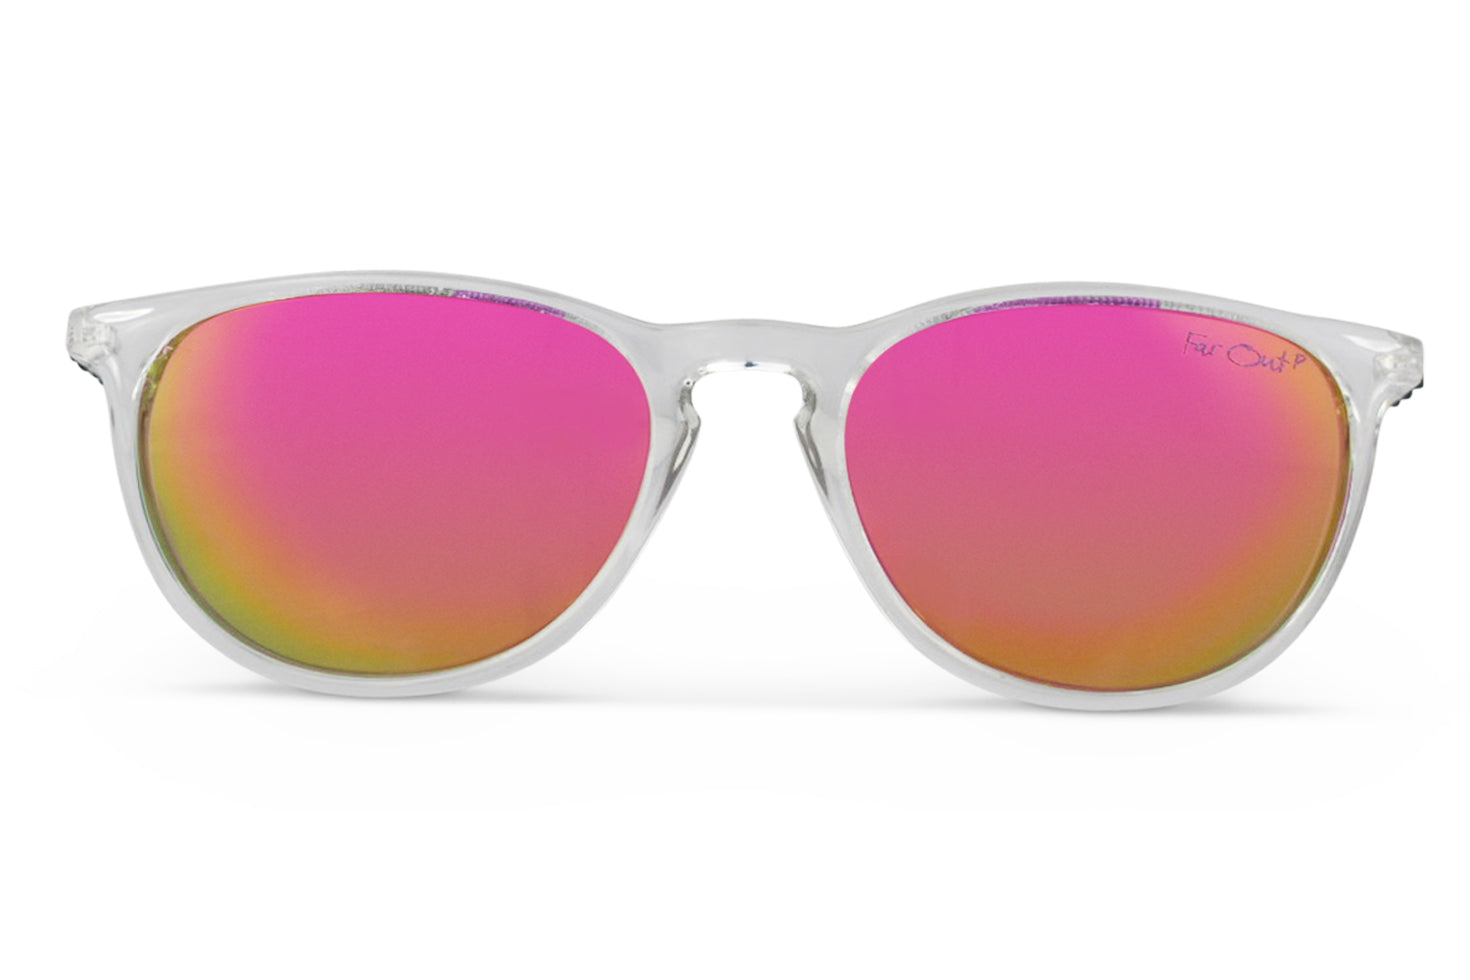 Clear Polarized Round Sunglasses Pink Lens Far Out Sunglasses 